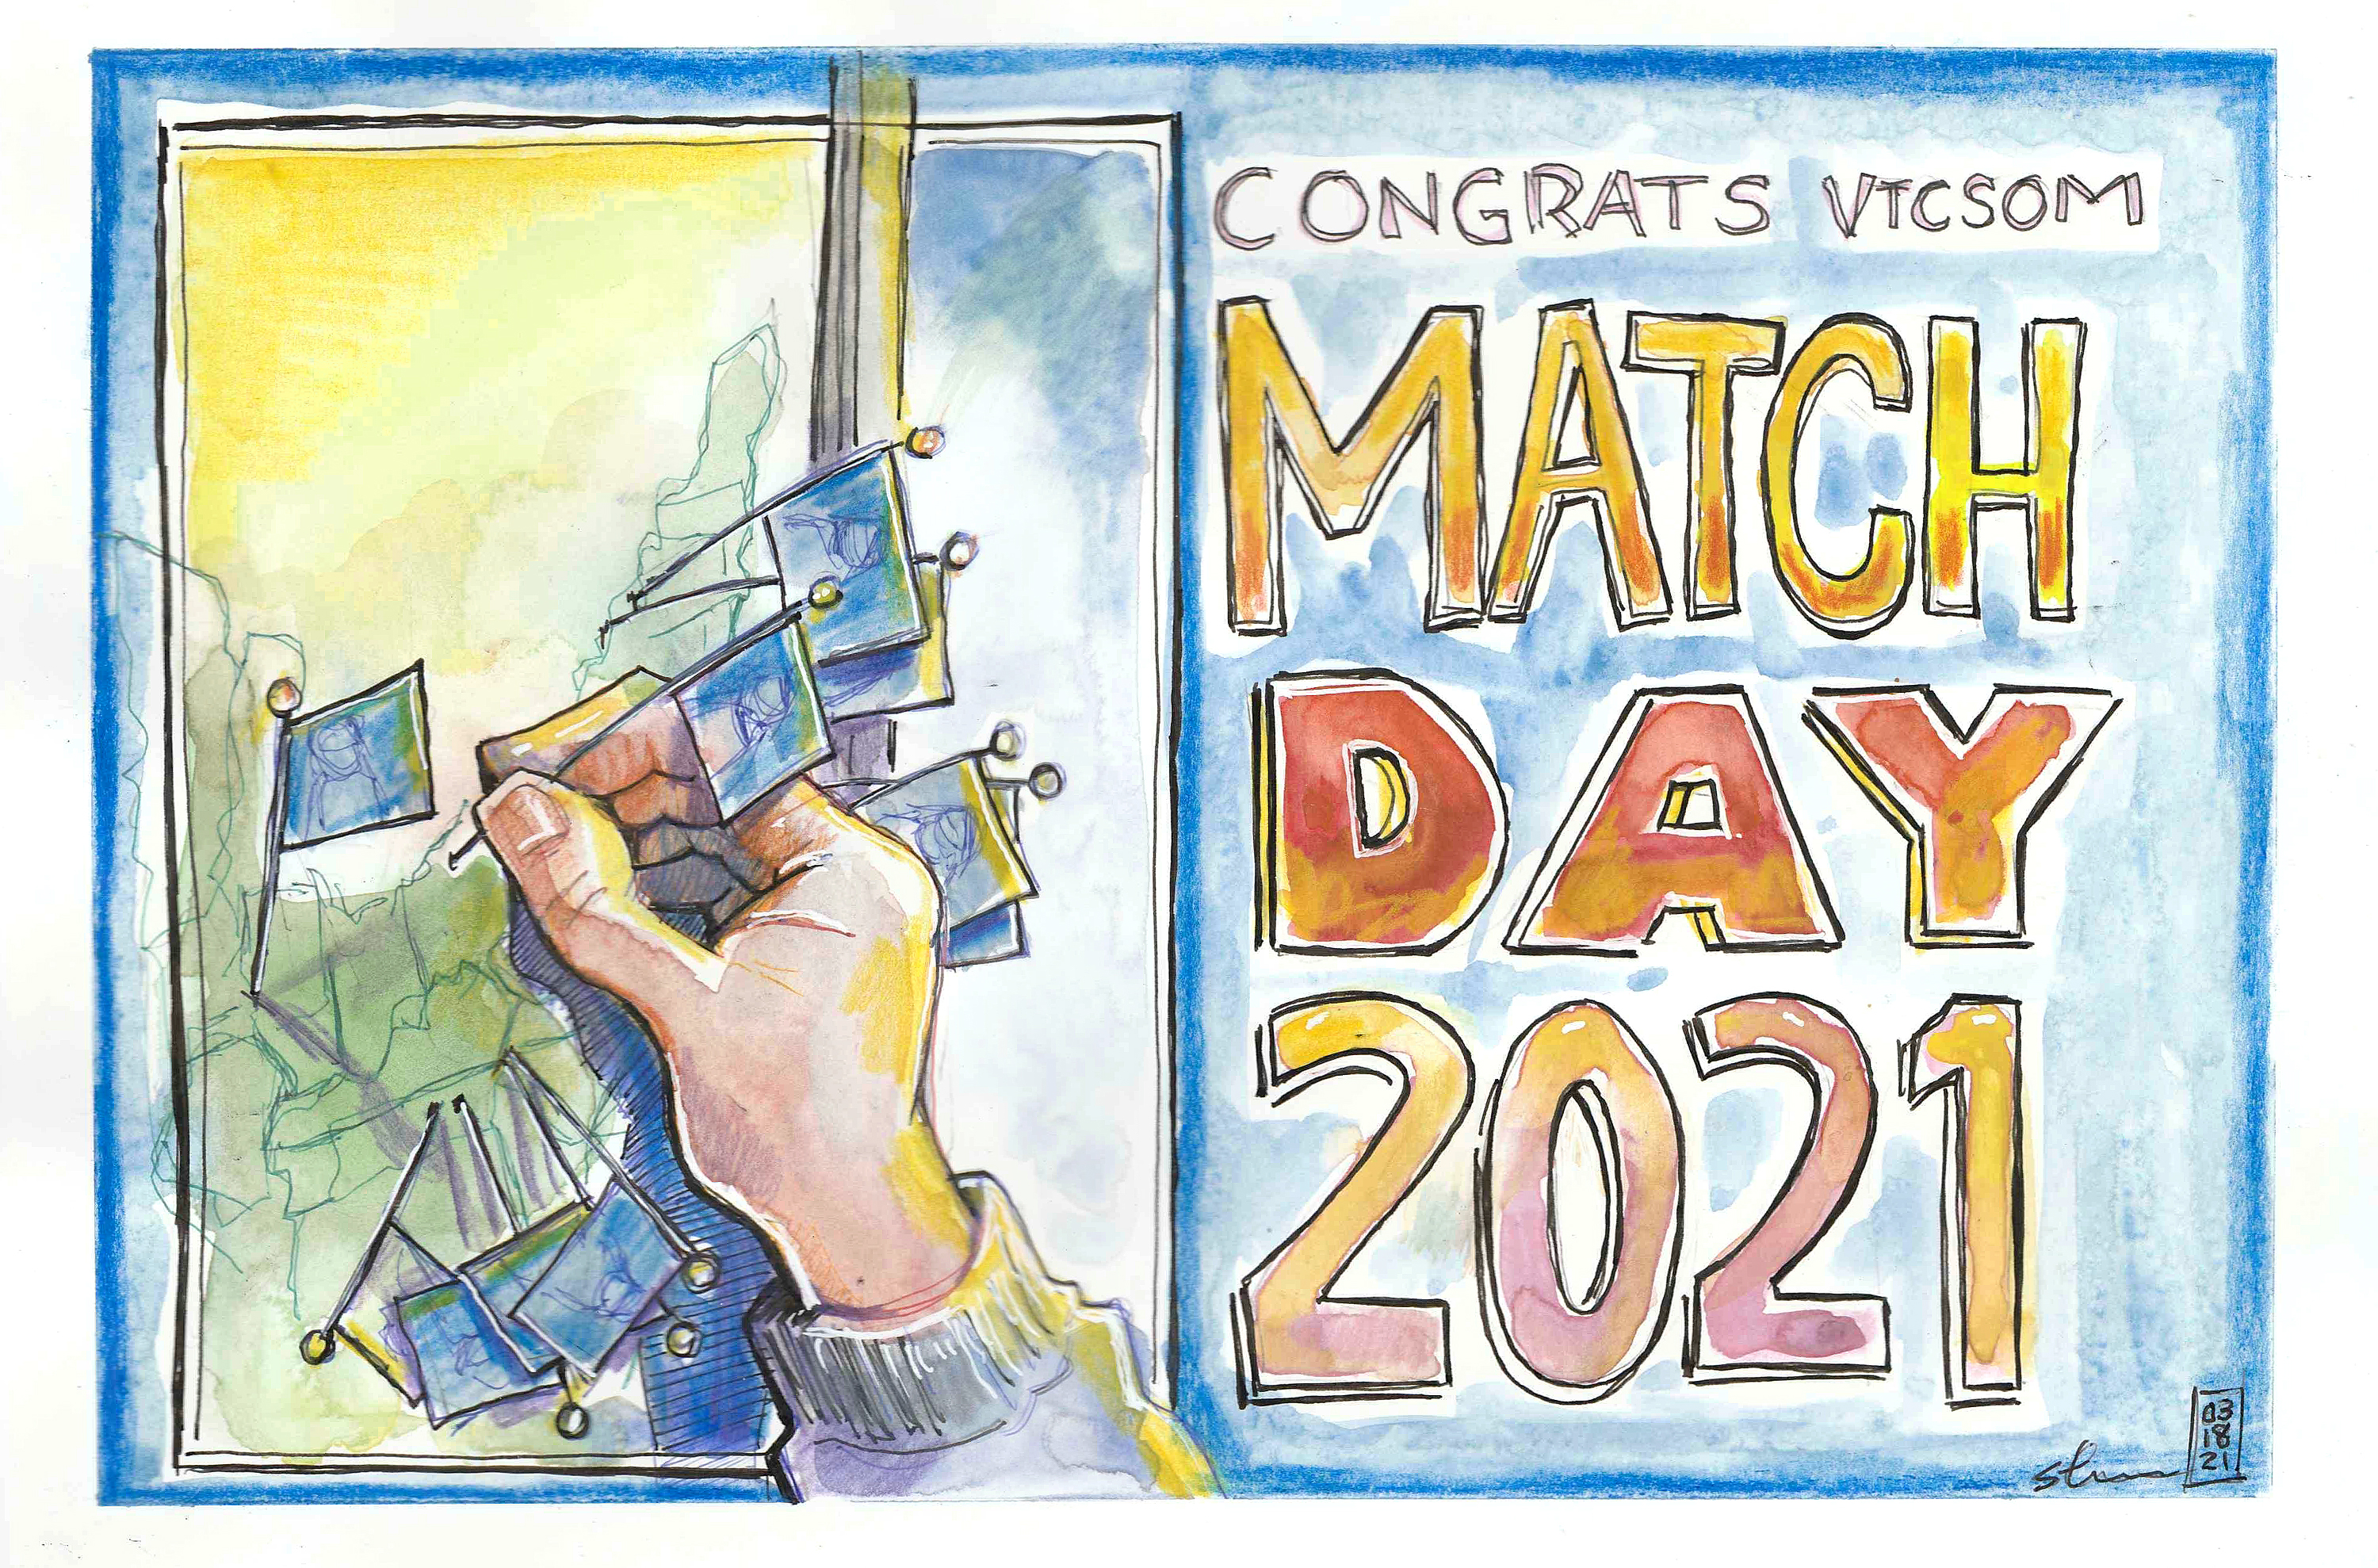 Match Day 2021 (00141) -- Appeared on March 19, 2021